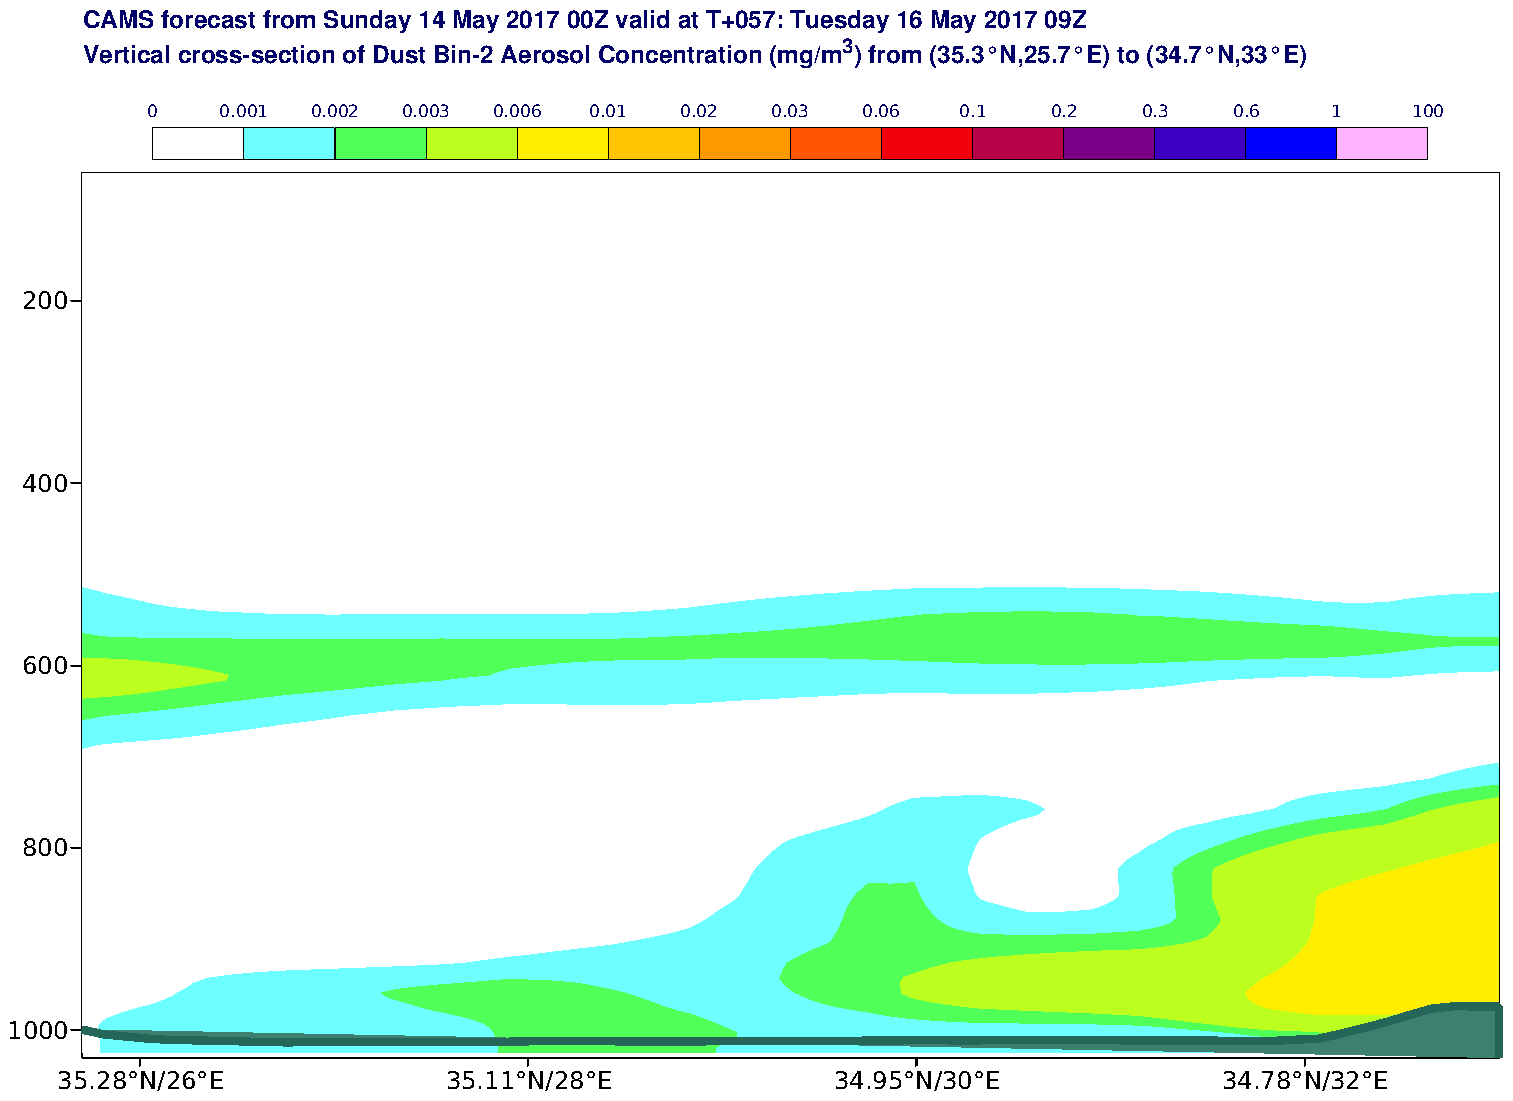 Vertical cross-section of Dust Bin-2 Aerosol Concentration (mg/m3) valid at T57 - 2017-05-16 09:00